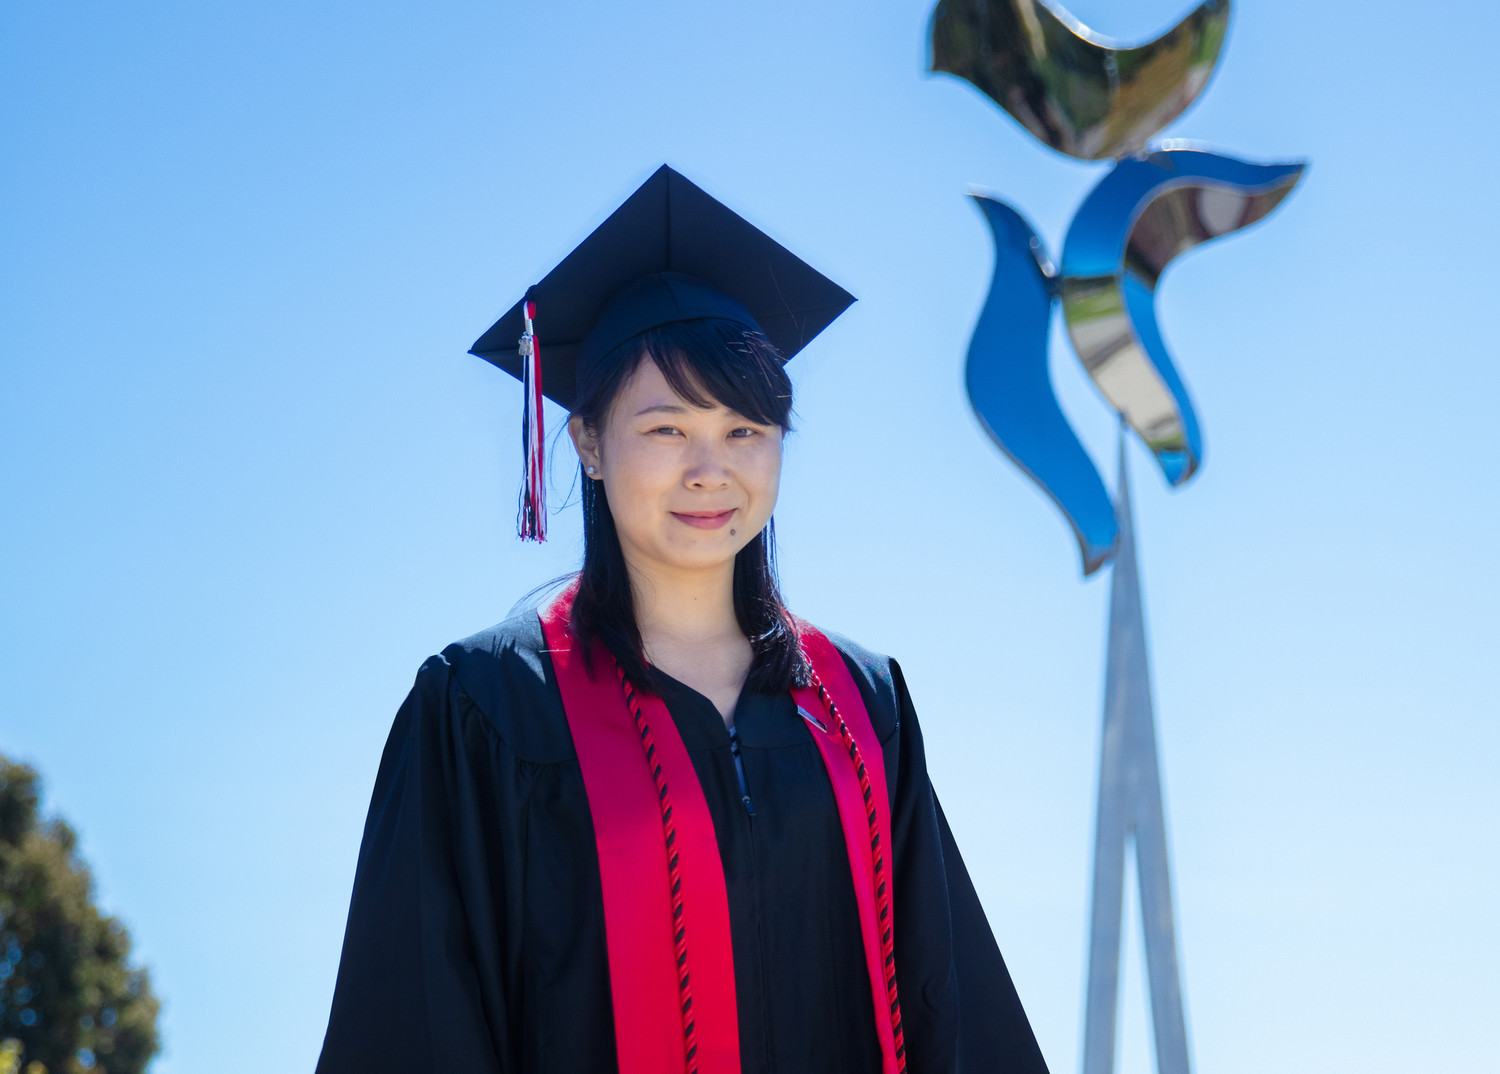 Chunli Cao smiling in cap and gown